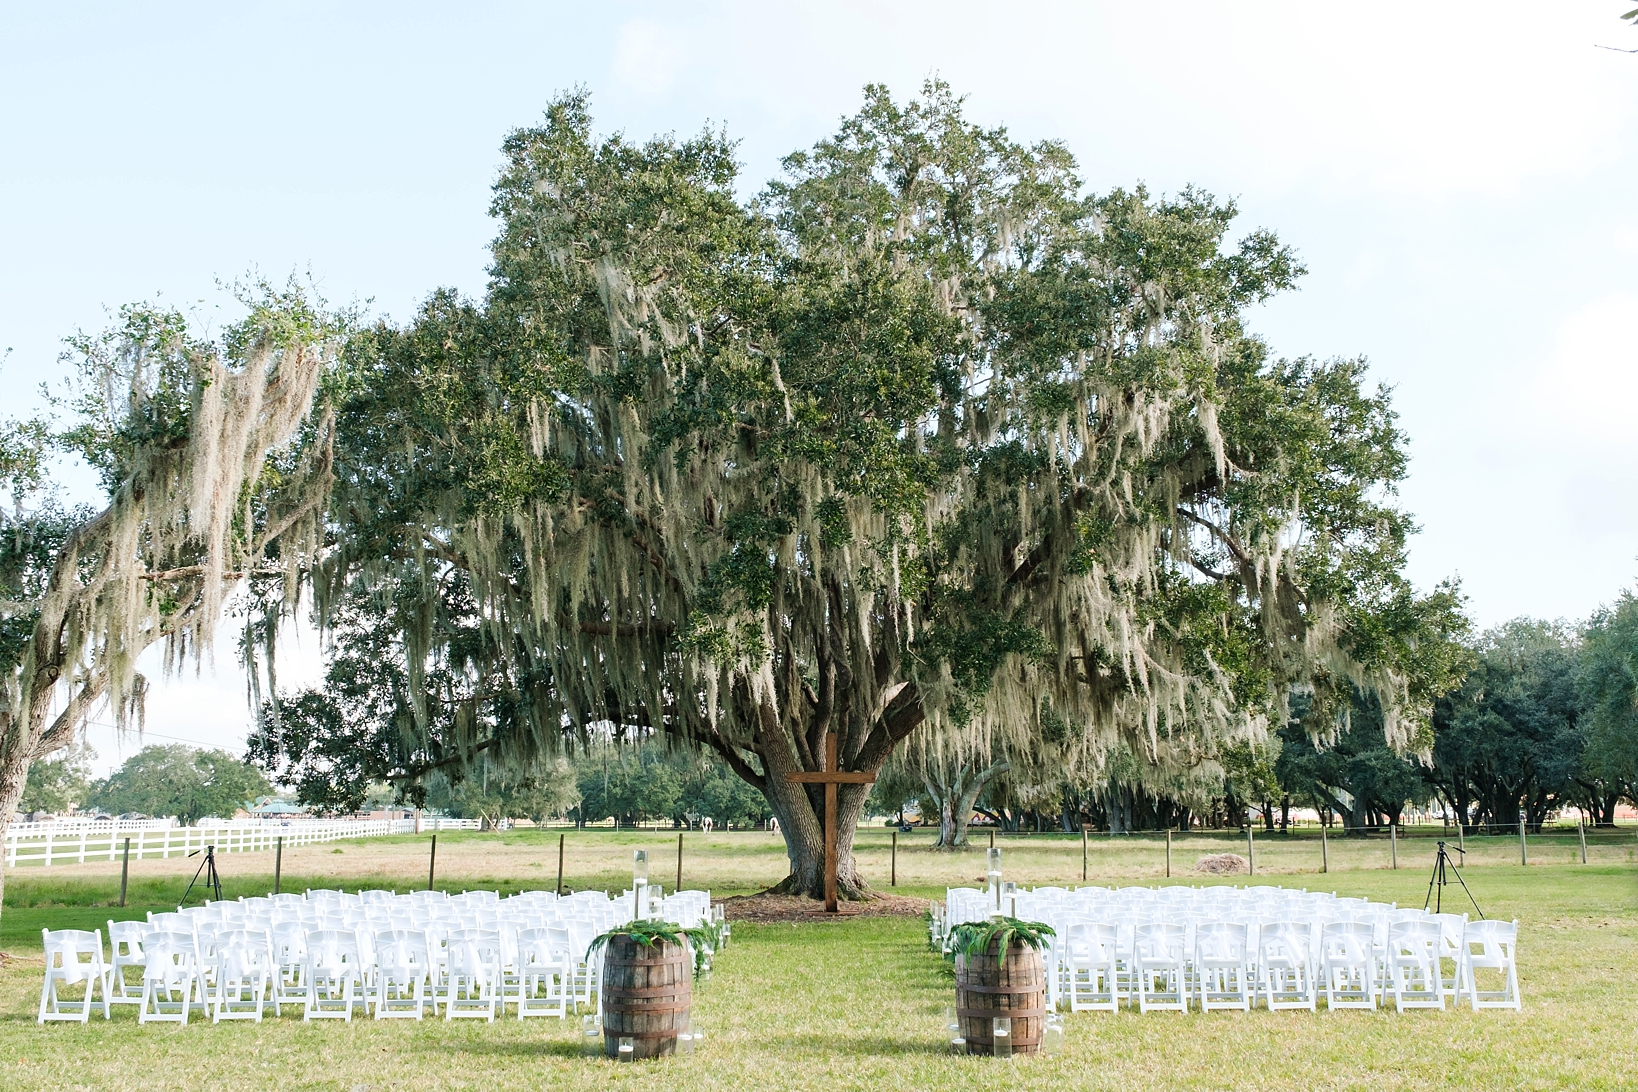 The wedding ceremony venue under an ancient oak tree in rural Florida